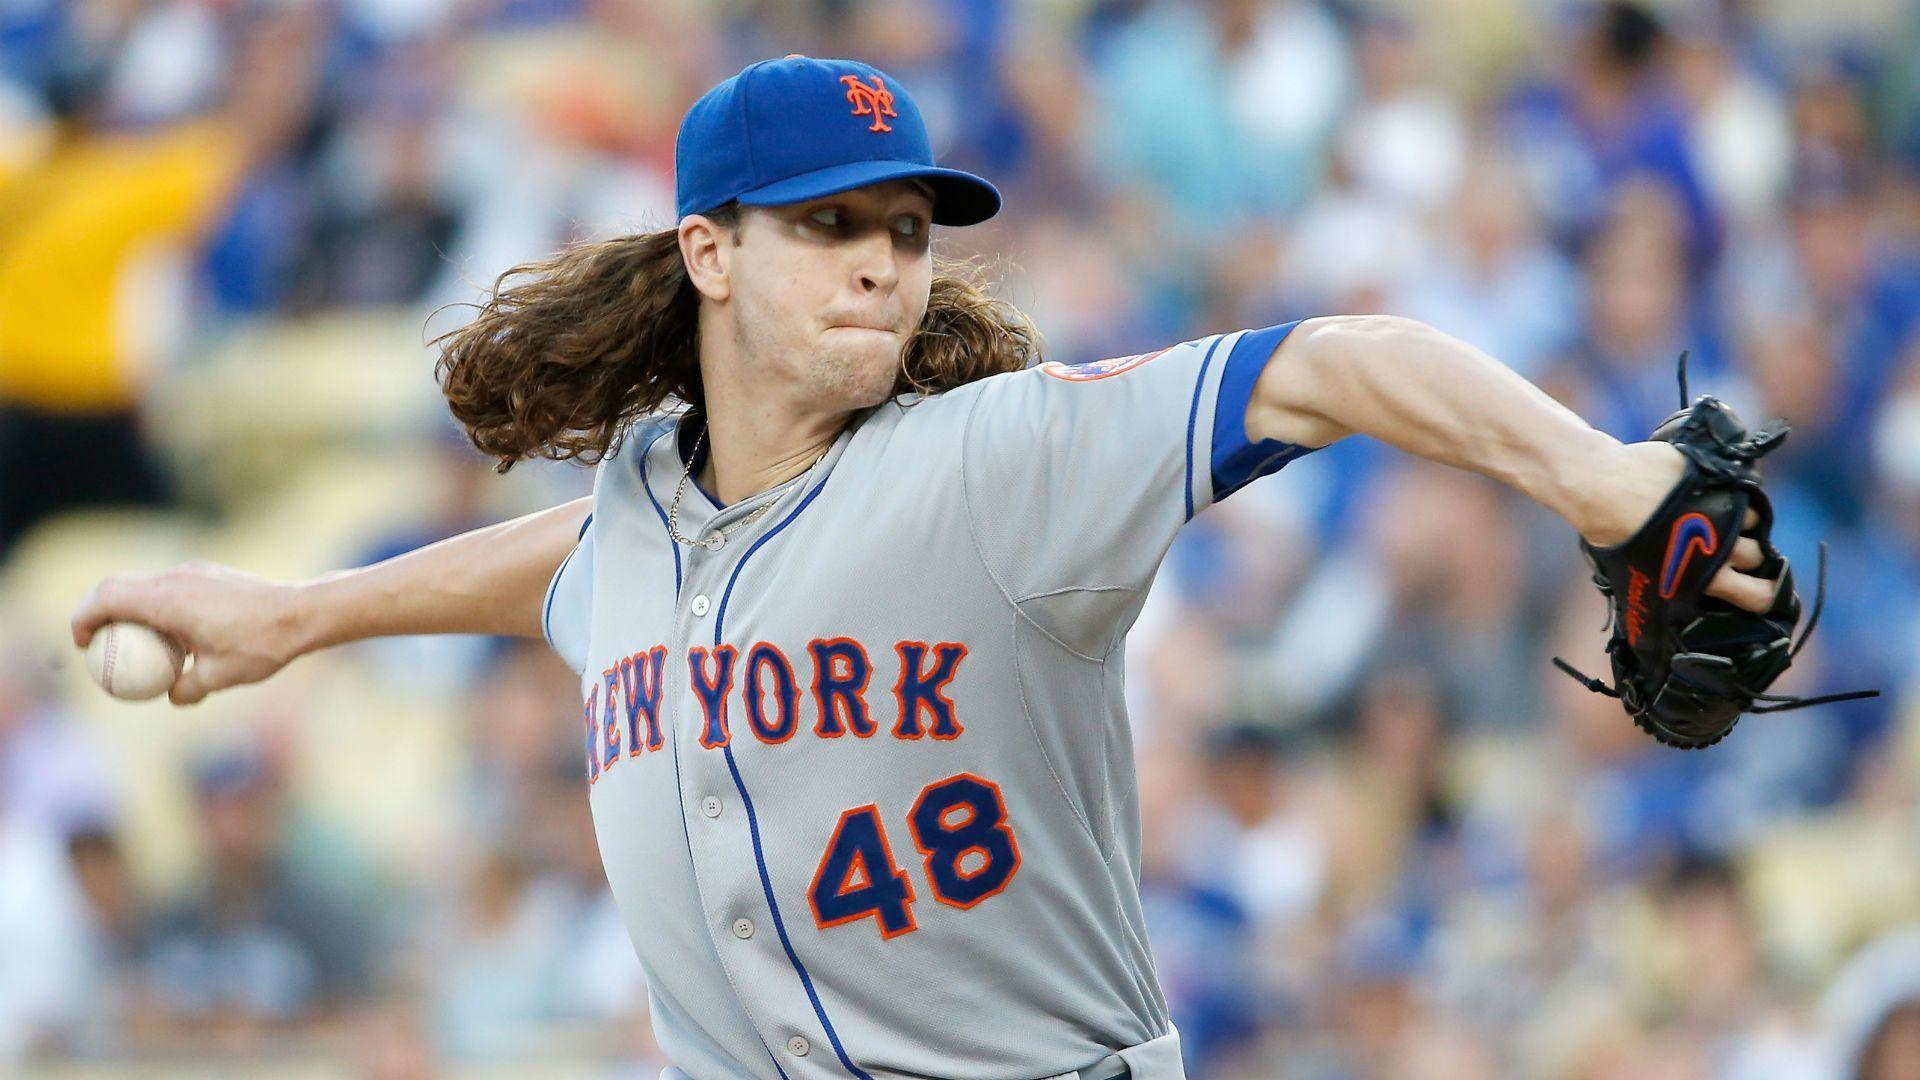 Jacob deGrom refuses to sign Mets' 2016 contract, will only make